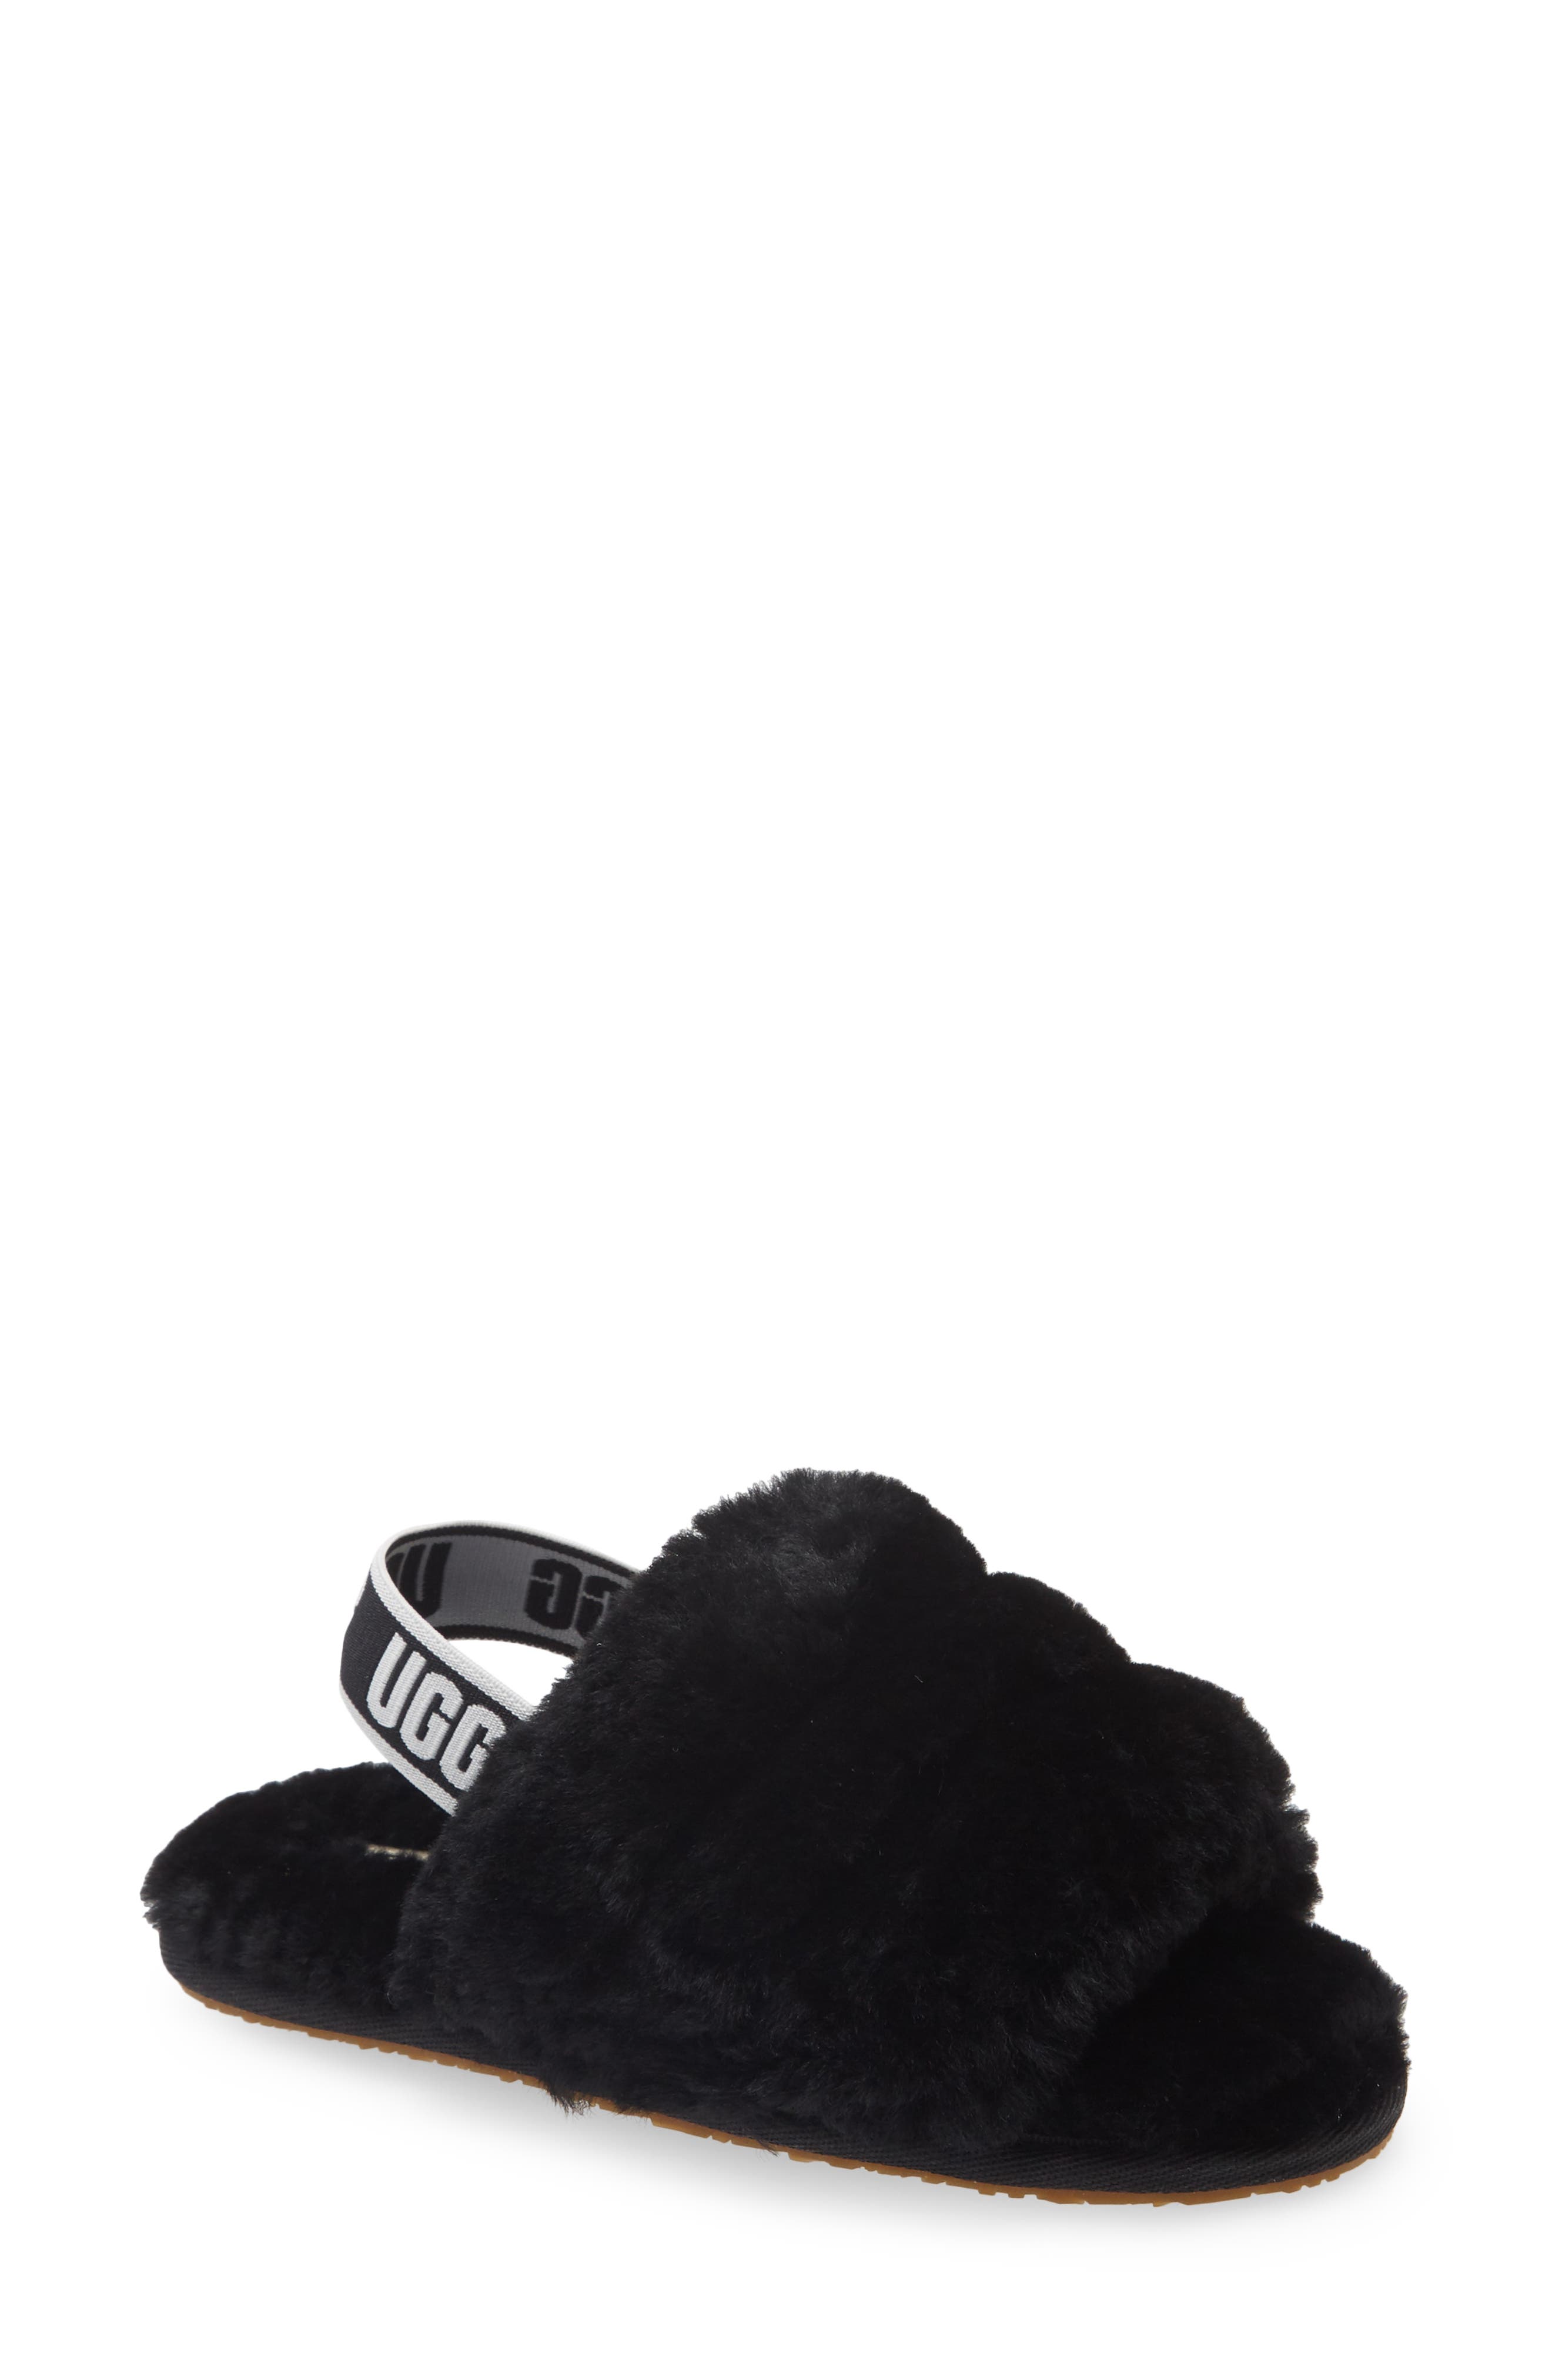 Fluff Yeah Slide Tiger pour Tout-Petits en UGG Chaussures Tongs taille 22 